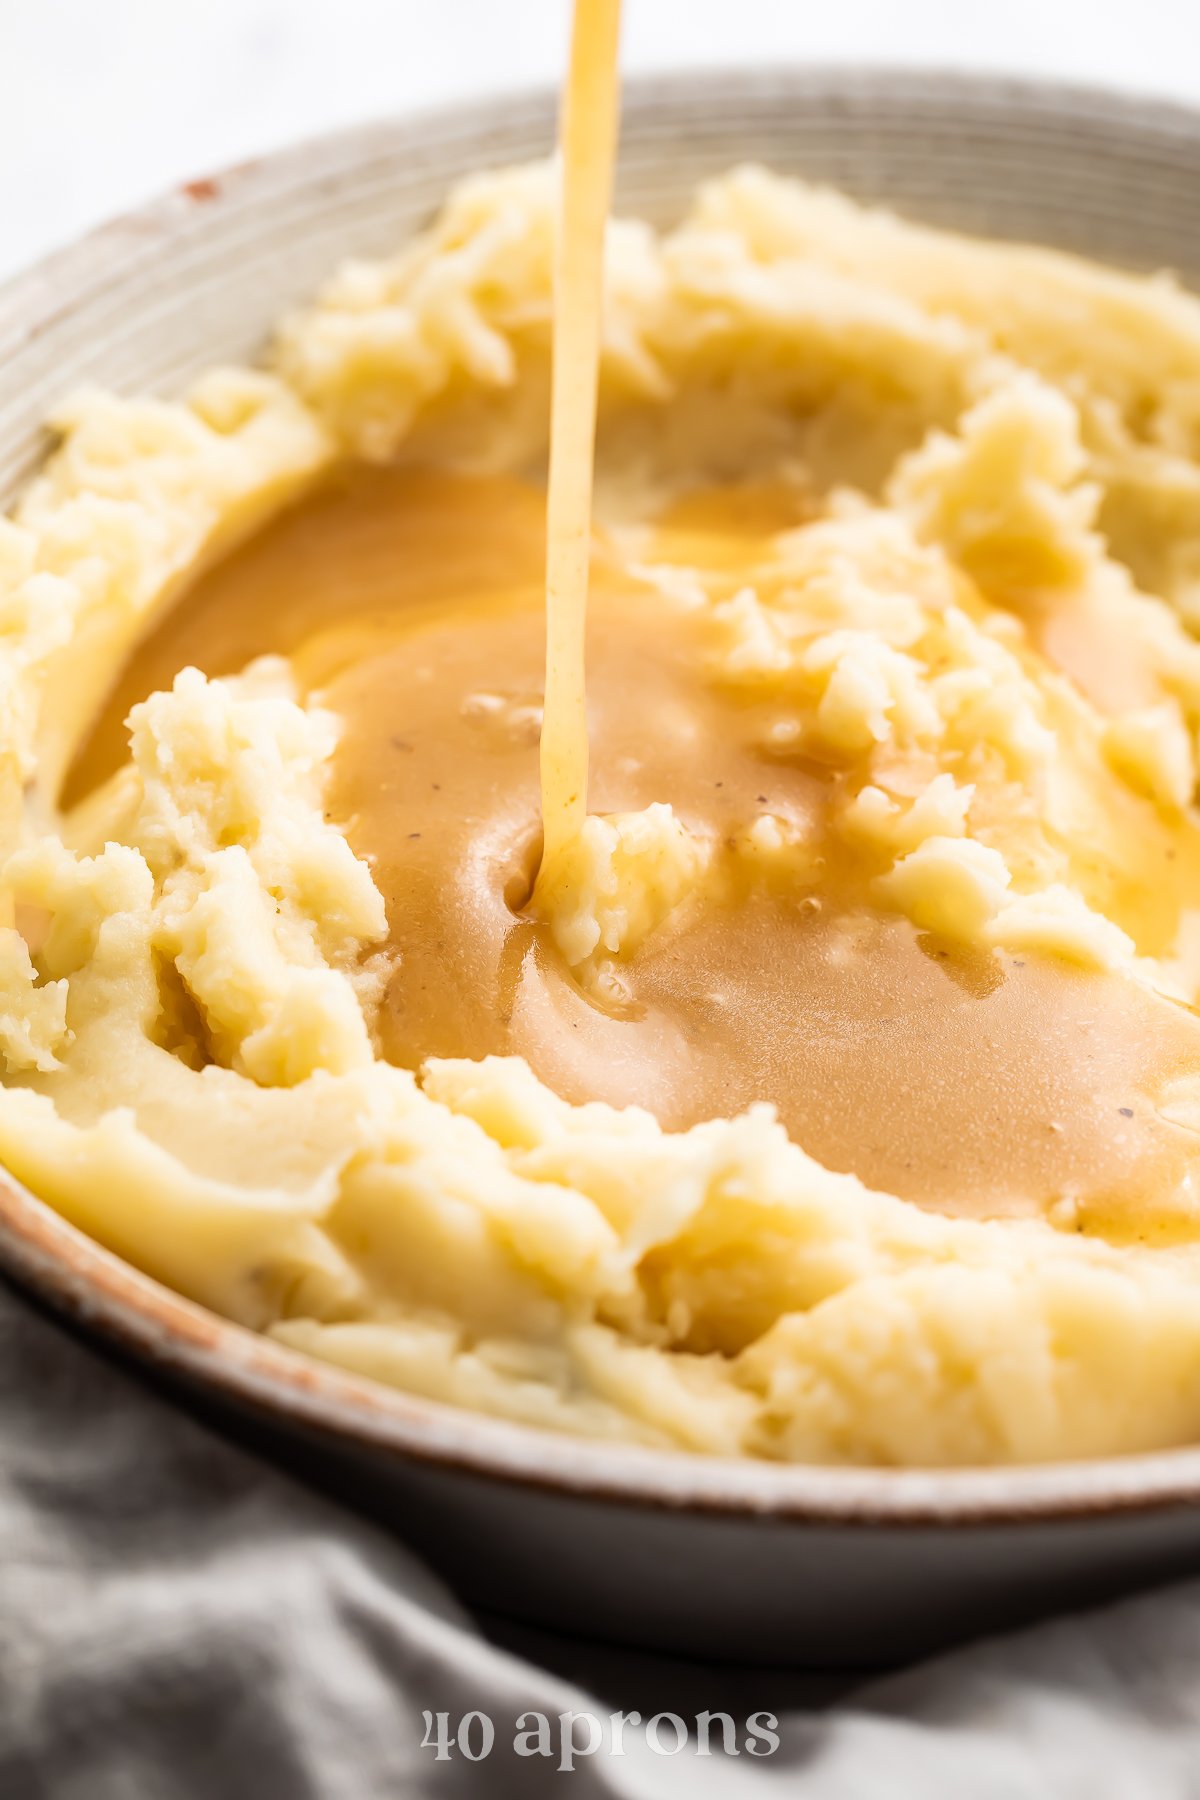 An angled look at a bowl of fluffy mashed potatoes with gluten free gravy being poured on top of the potatoes from above.